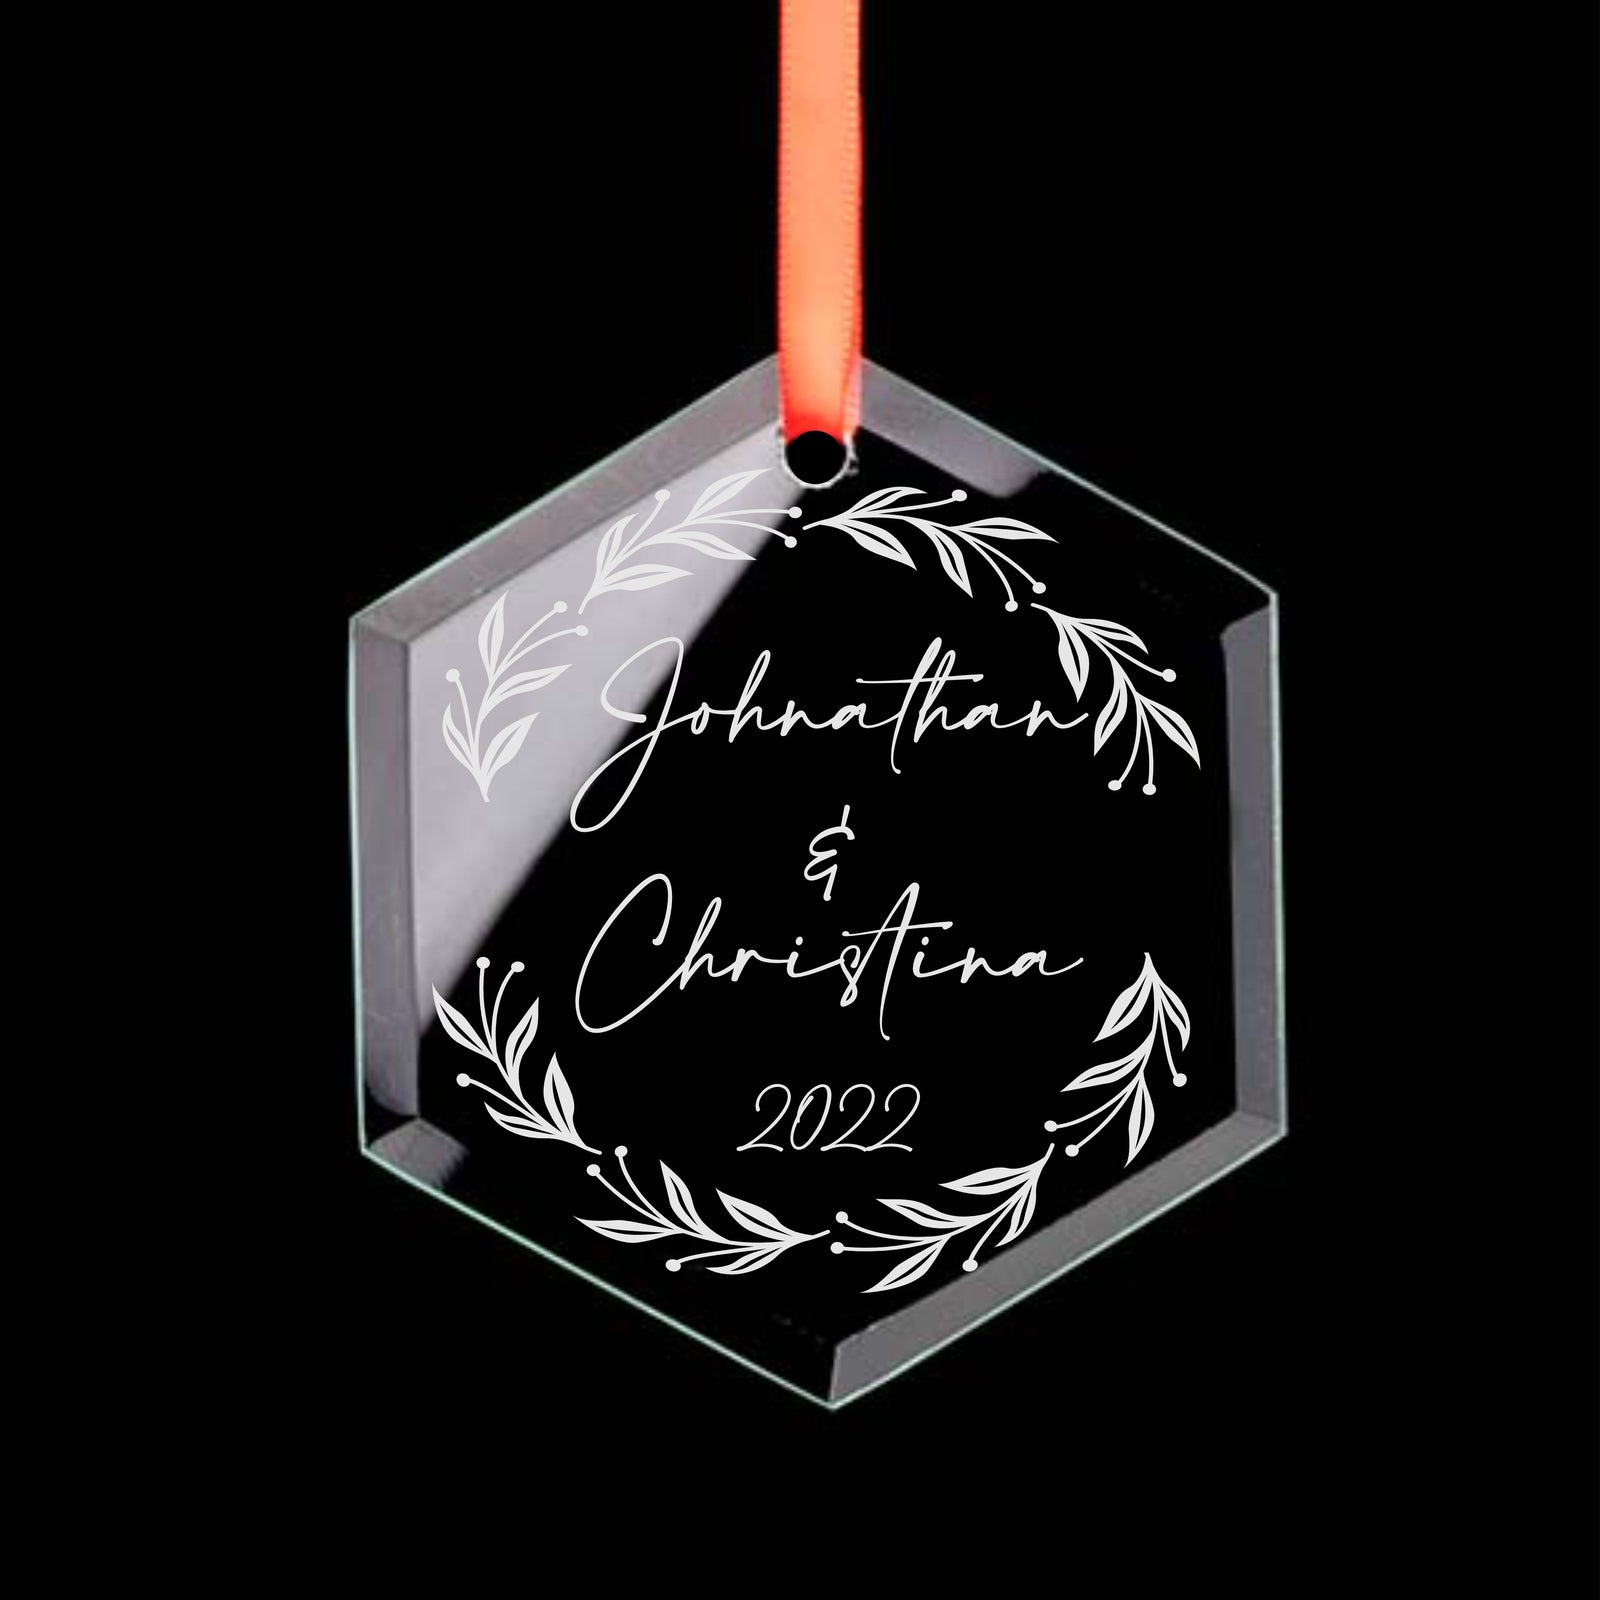 Engraved Christmas Ornament: Personalized Keepsakes for the Holiday Season